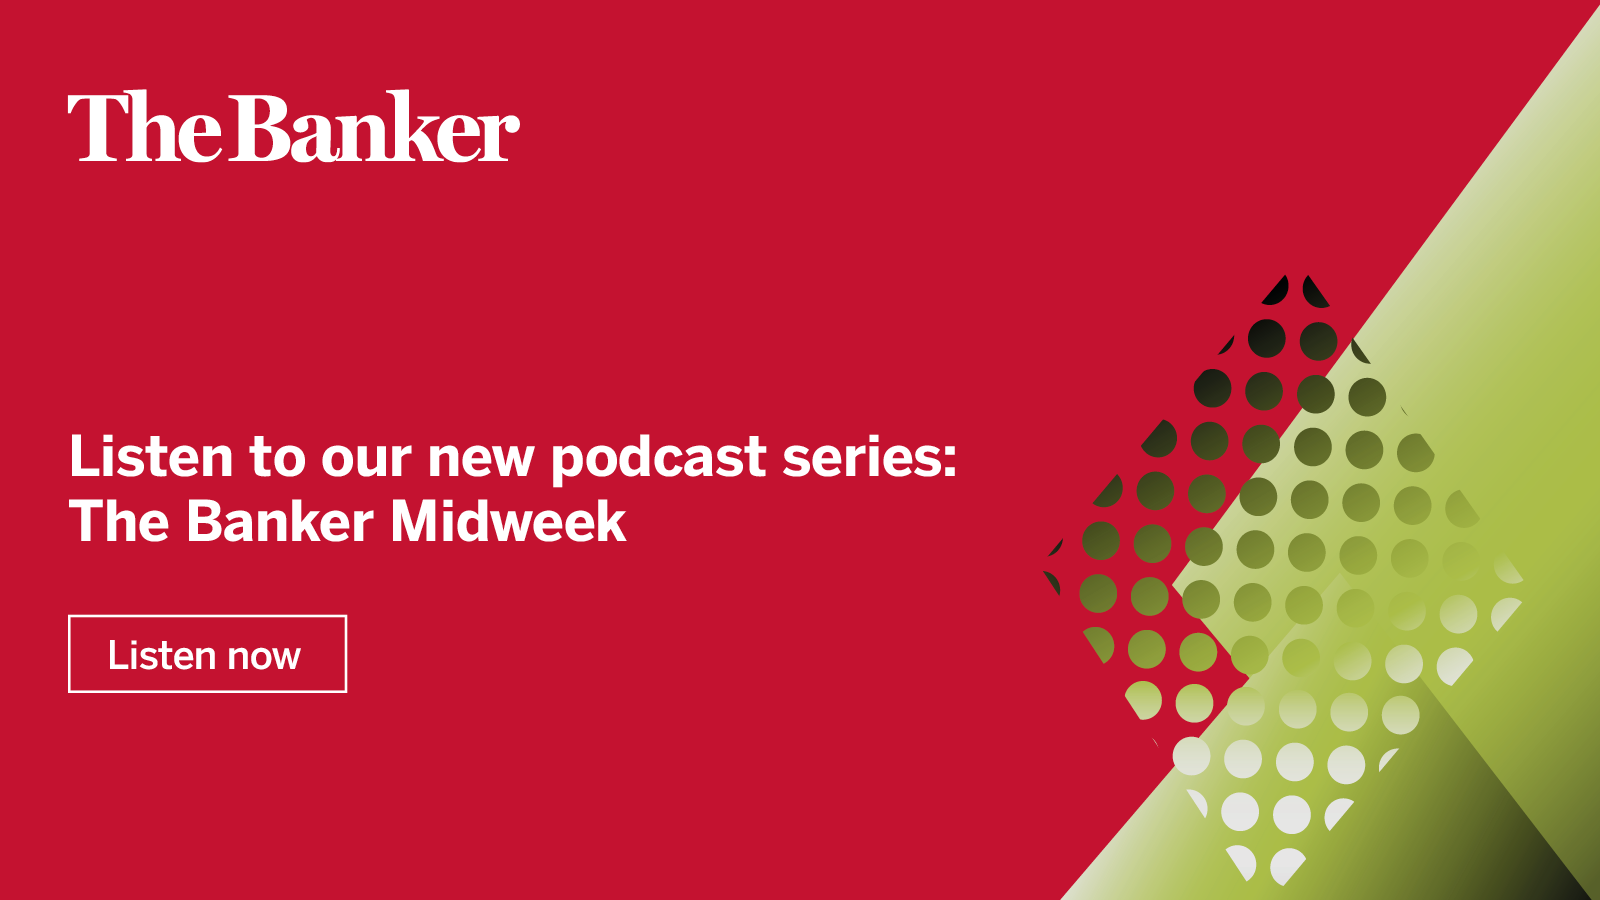 8065439-TB-The-Banker-midweek-podcast-logo_1200x675